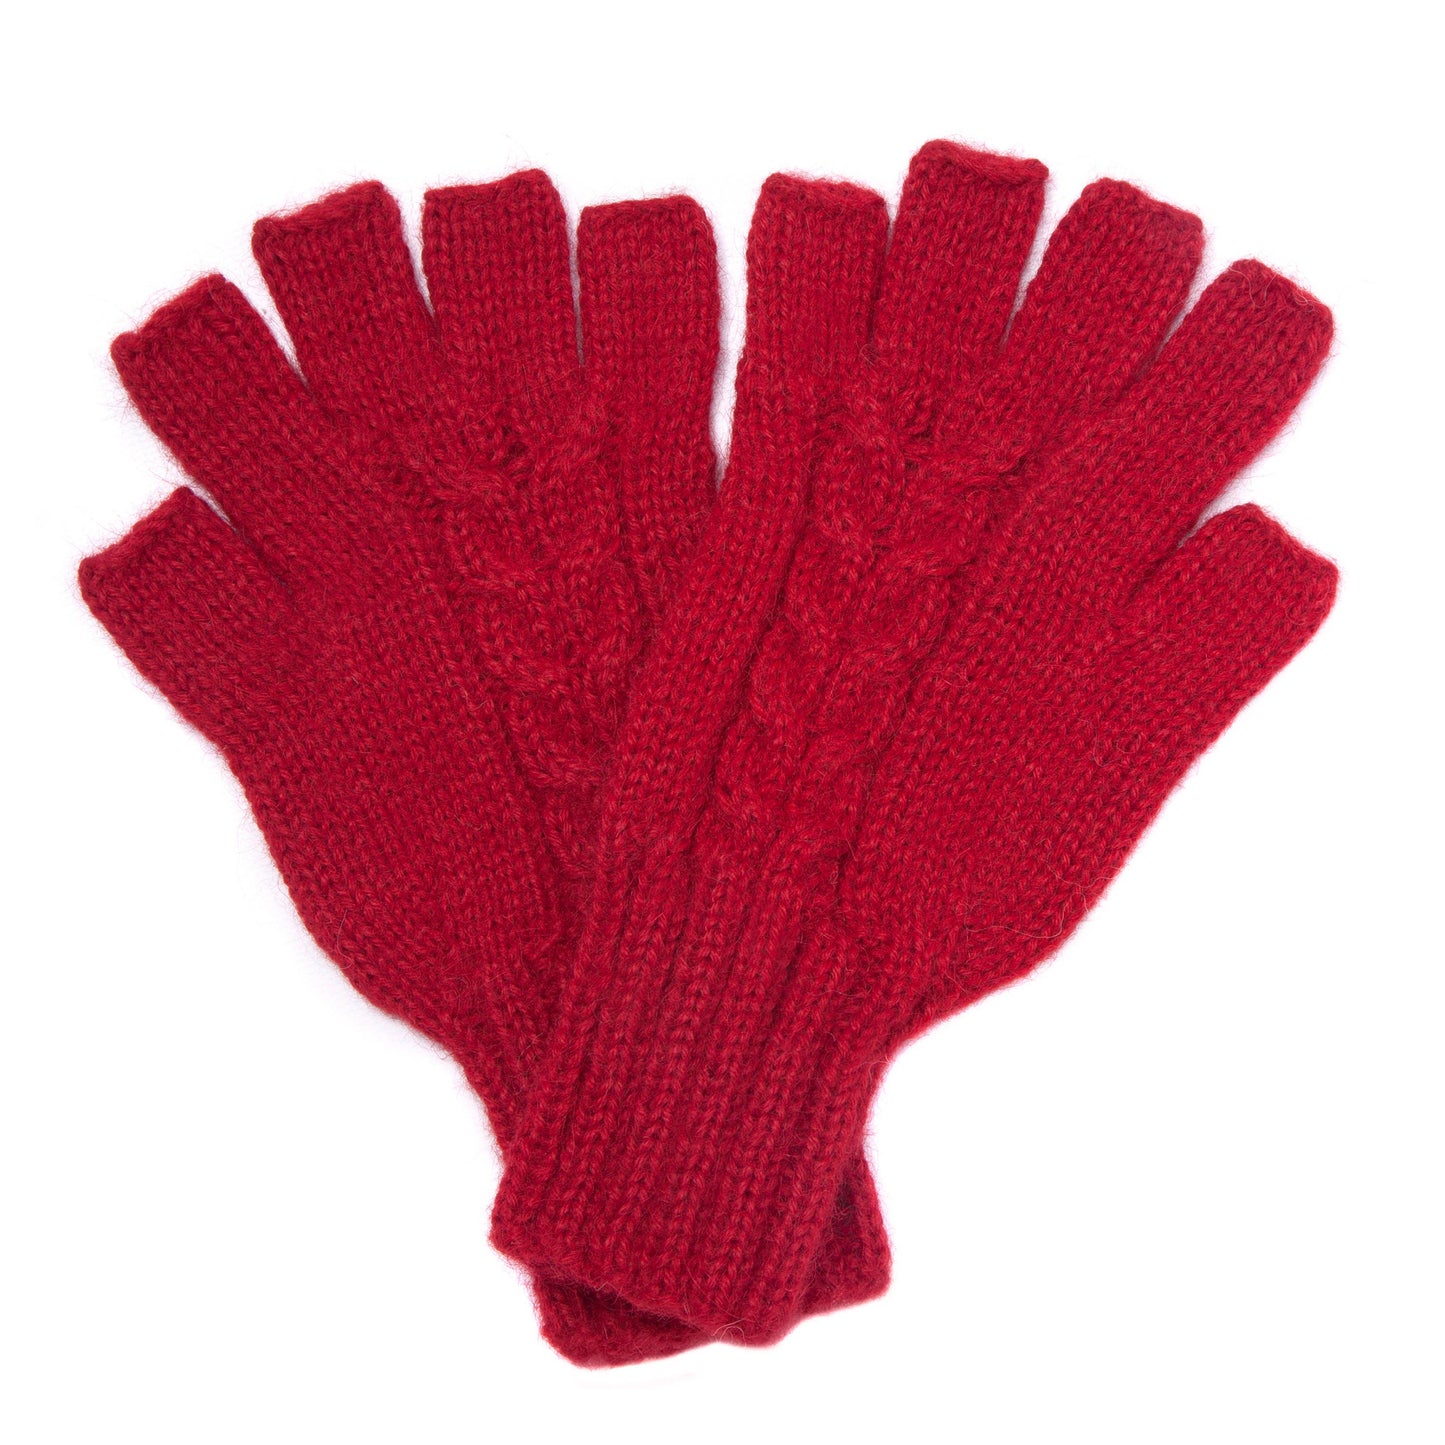 Gloves, fingerless, 'half finger', 100% alpaca wool, Hand knitted, warm winter mittens, Fair trade, Ethical gift, plastic free, eco knit